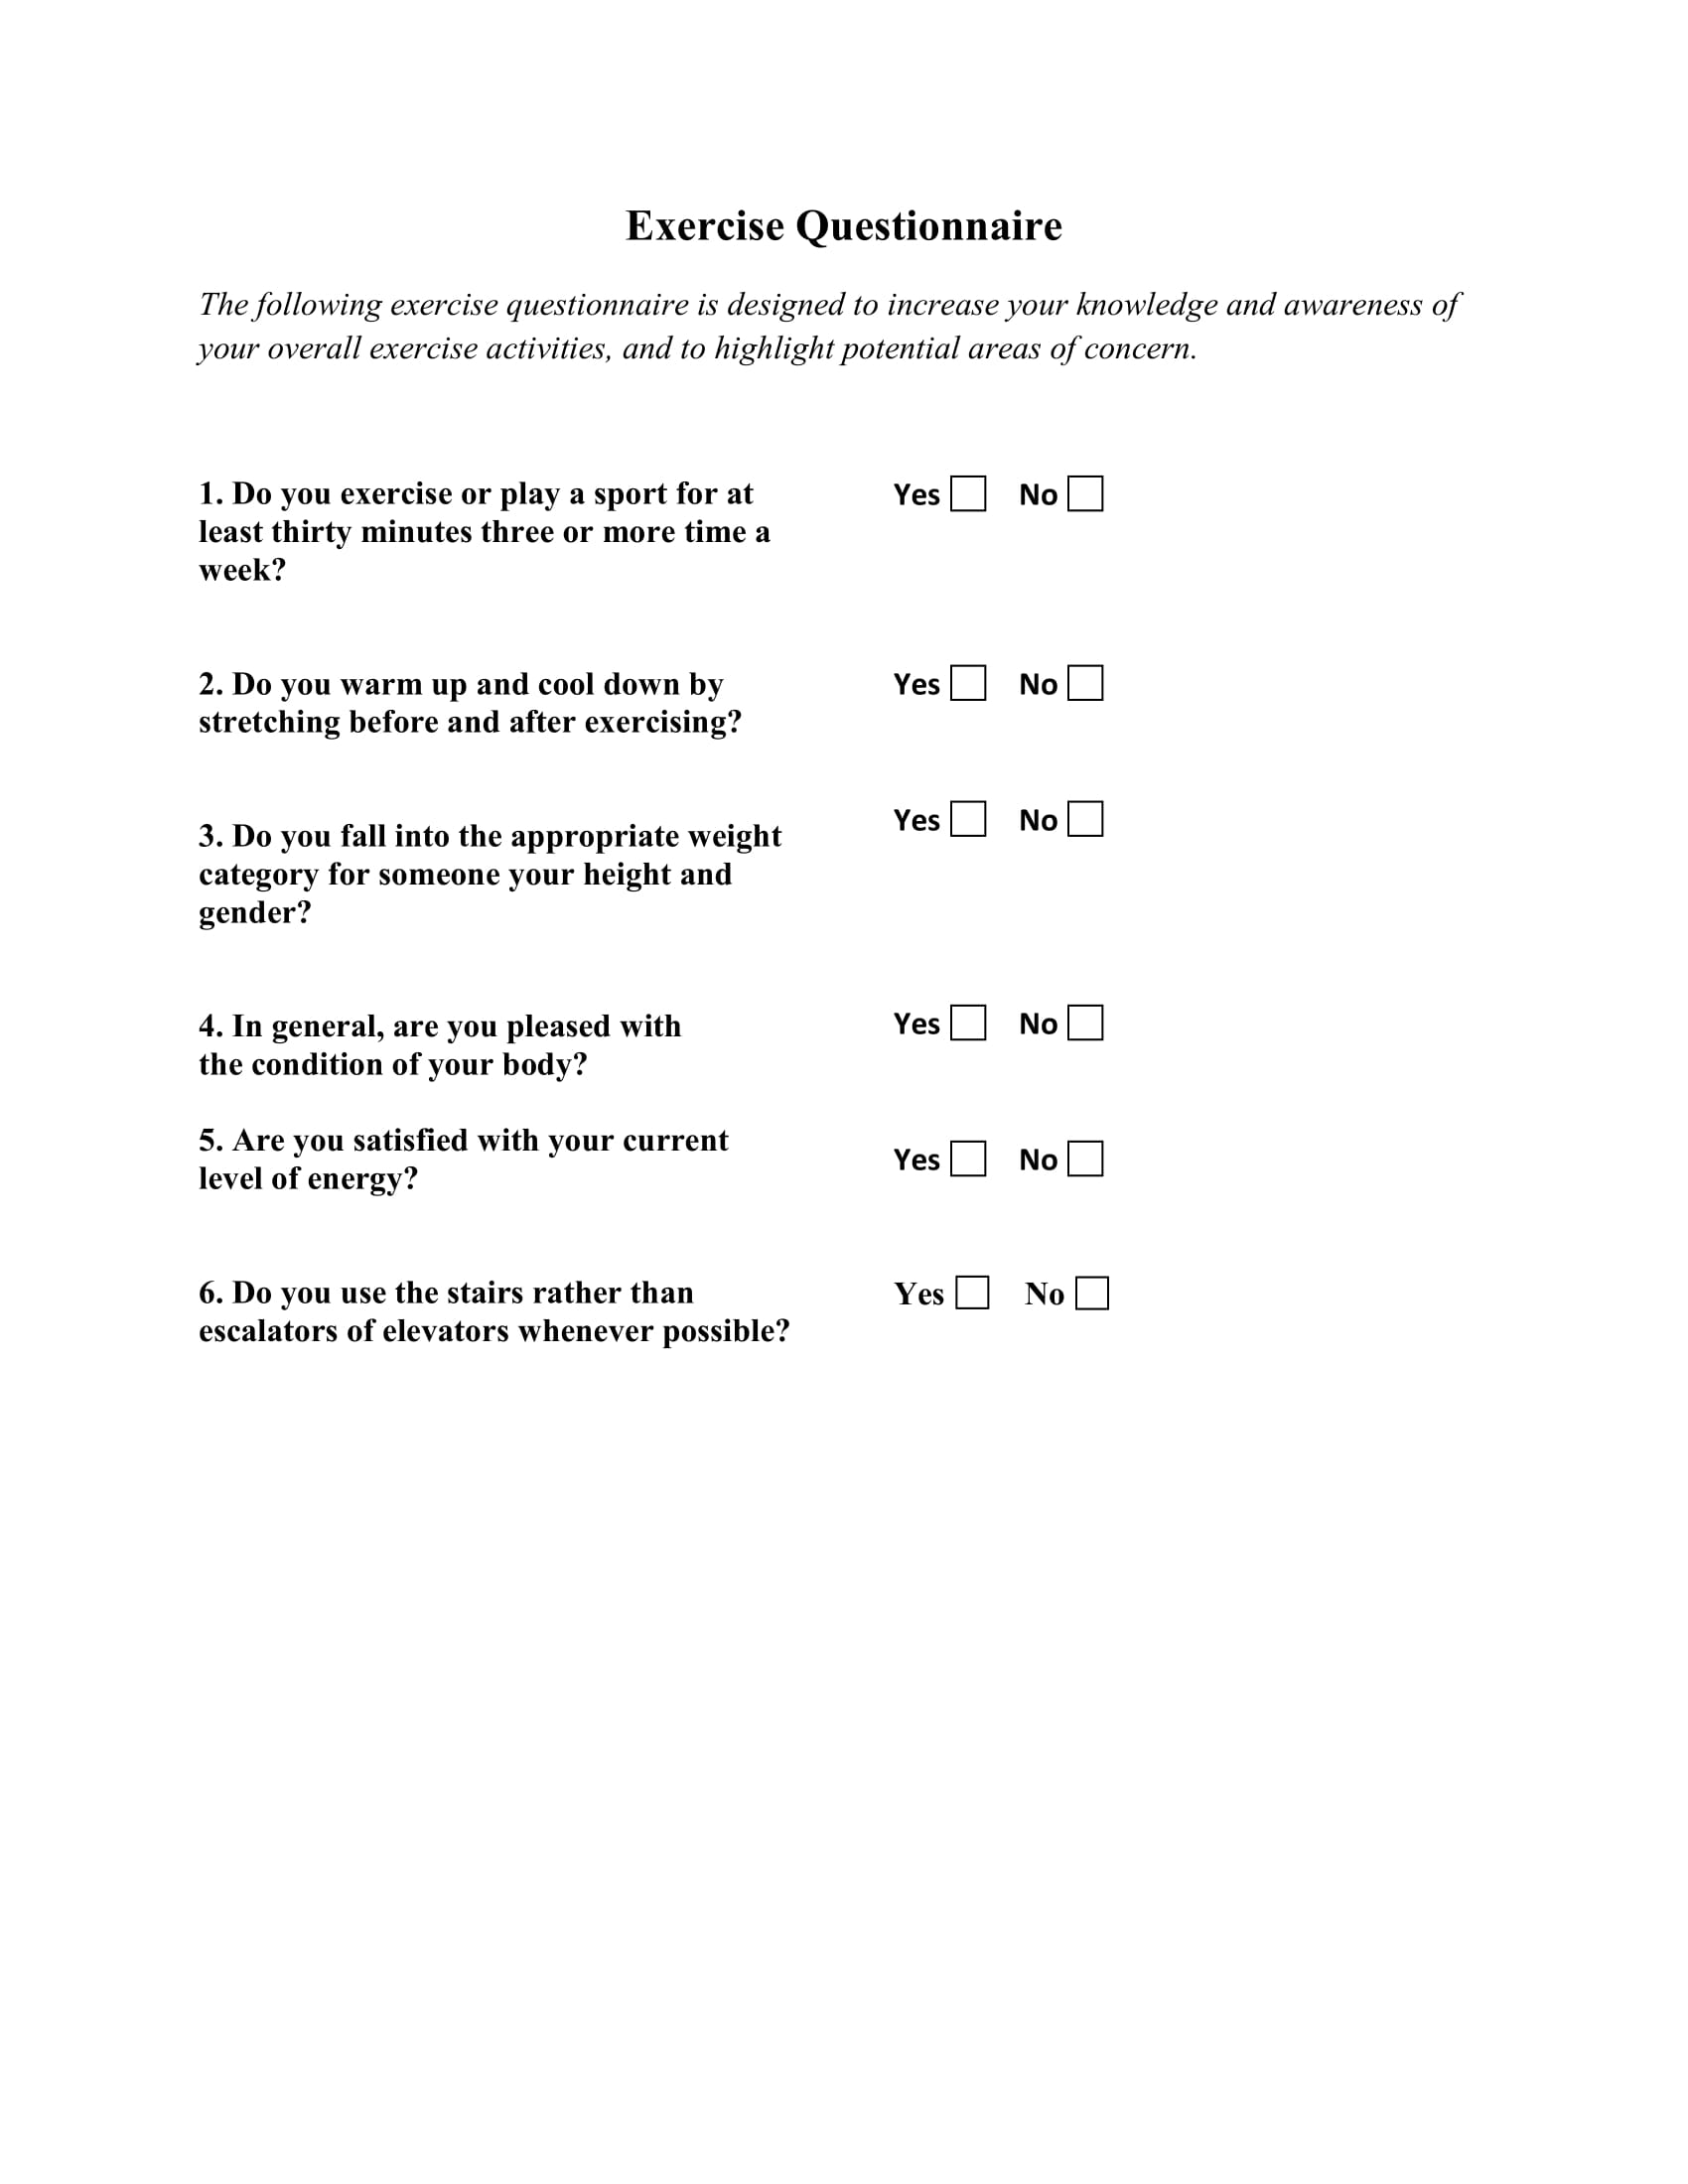 Printable exercise questionnaire for personal trainers to give to their clients.